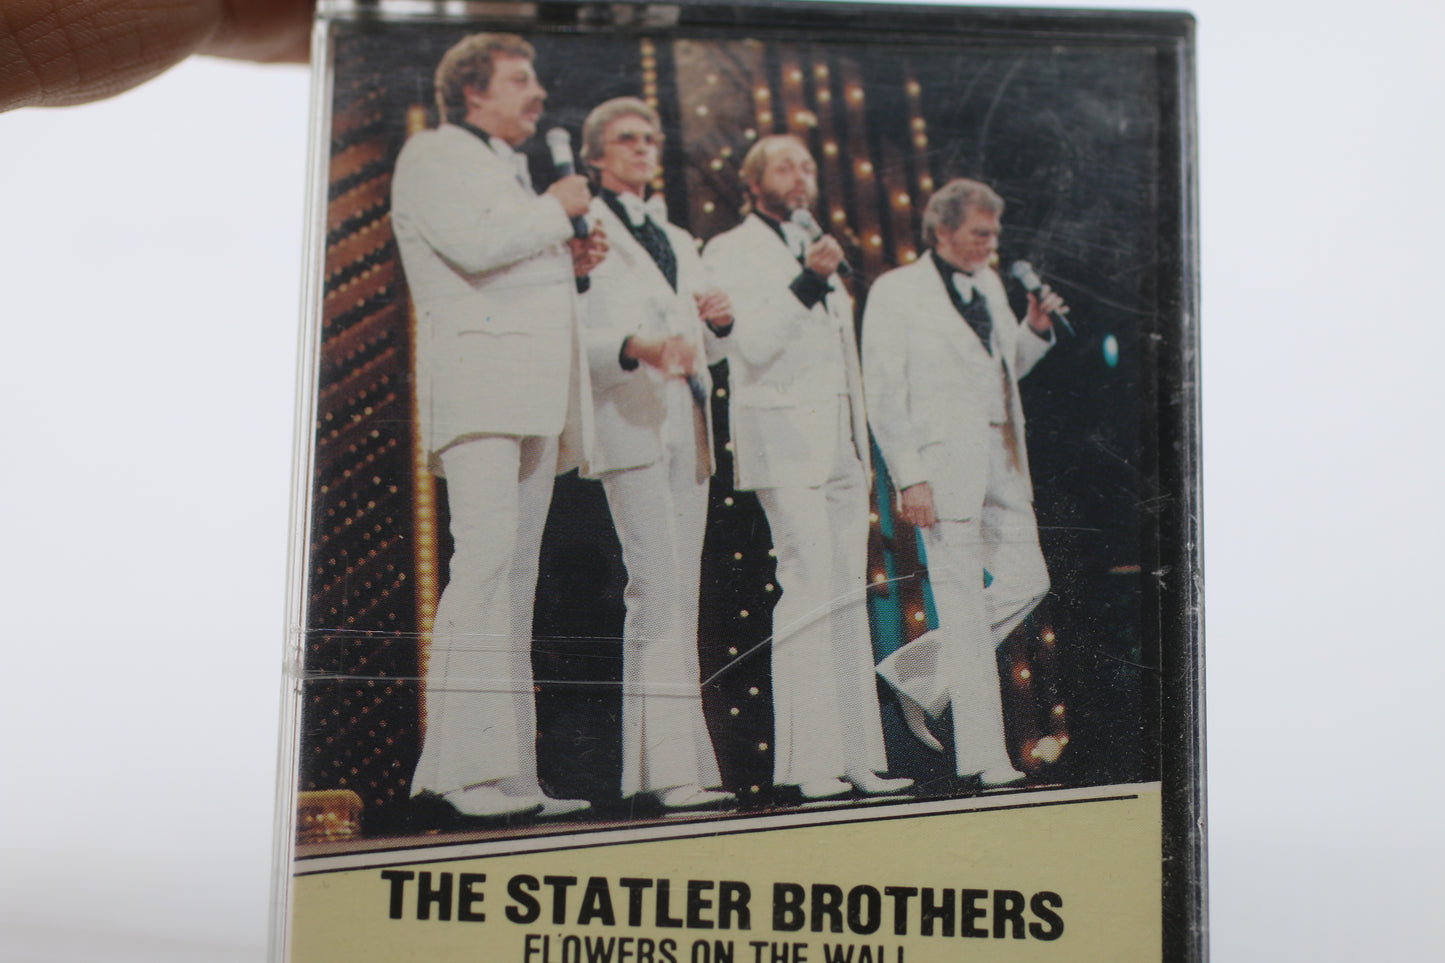 THE STATLER BROTHERS Audio Cassette Tape FLOWERS ON THE WALL 1985 CBS BUT-50054